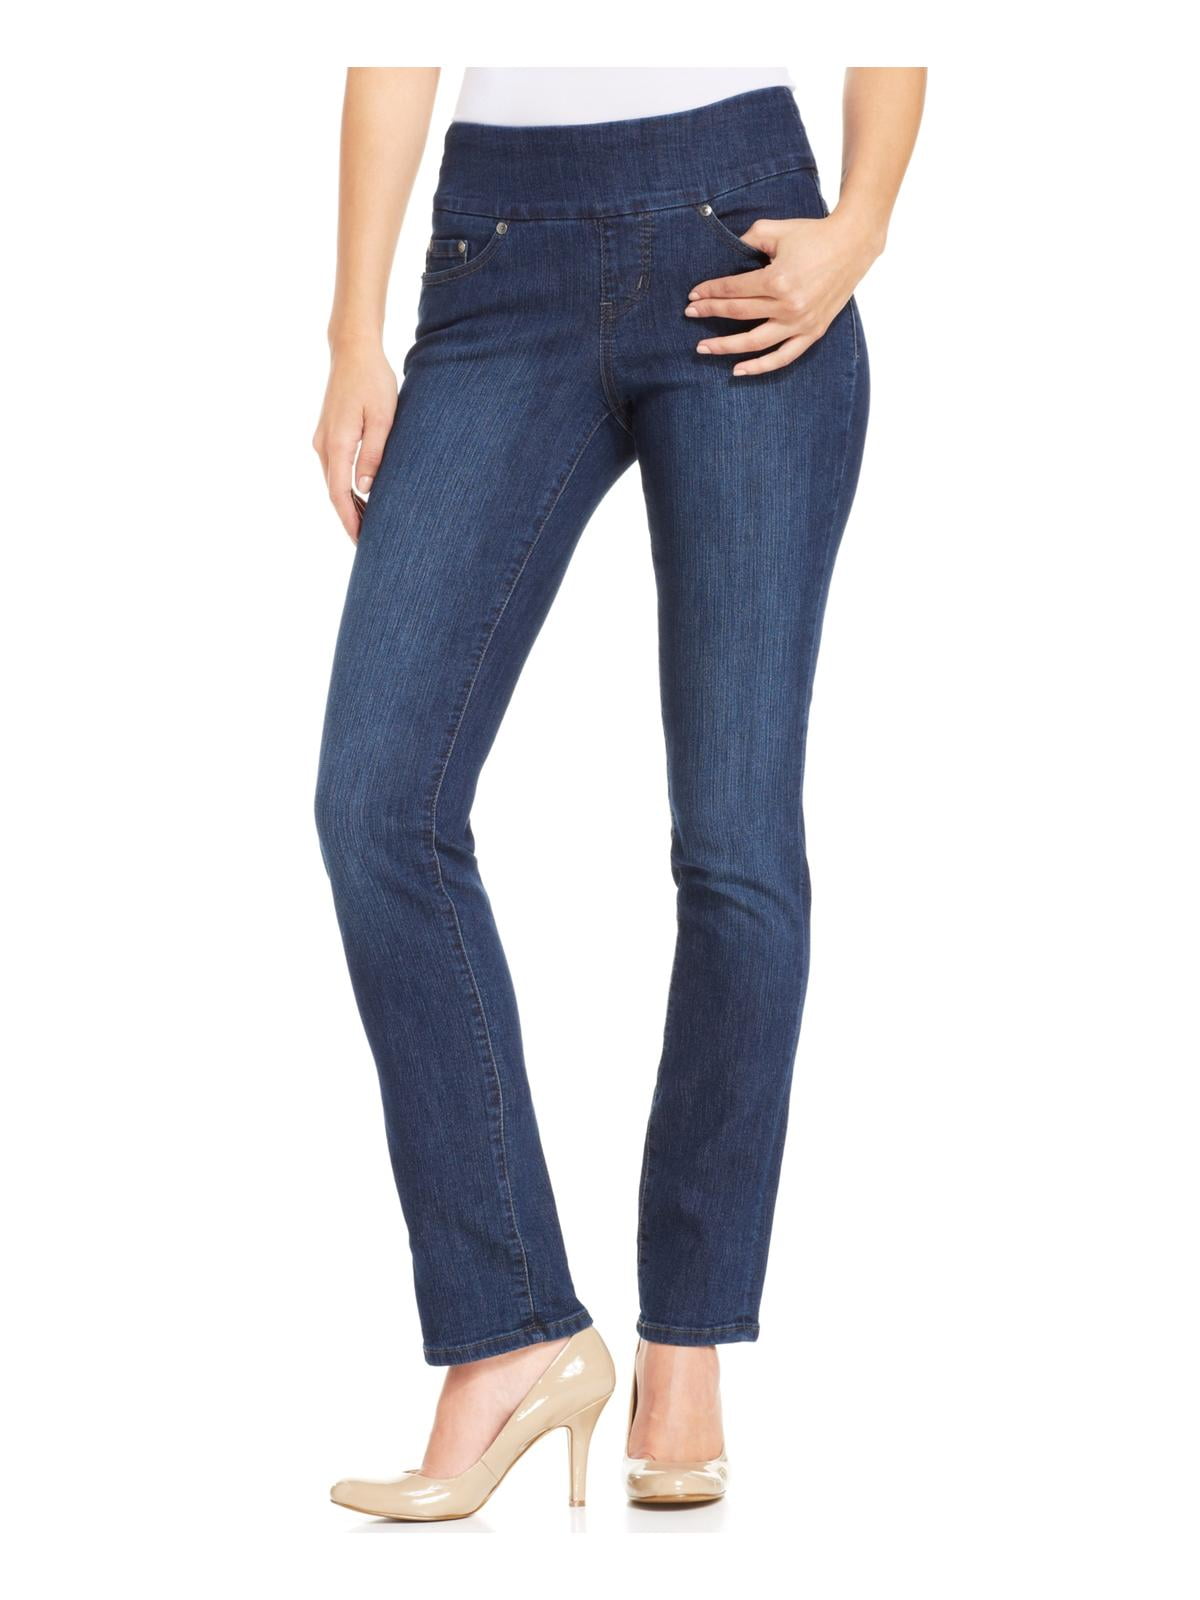 JAG Jeans - Jag Jeans Womens Peri Anchor Wash Embroidered Jeggings ...